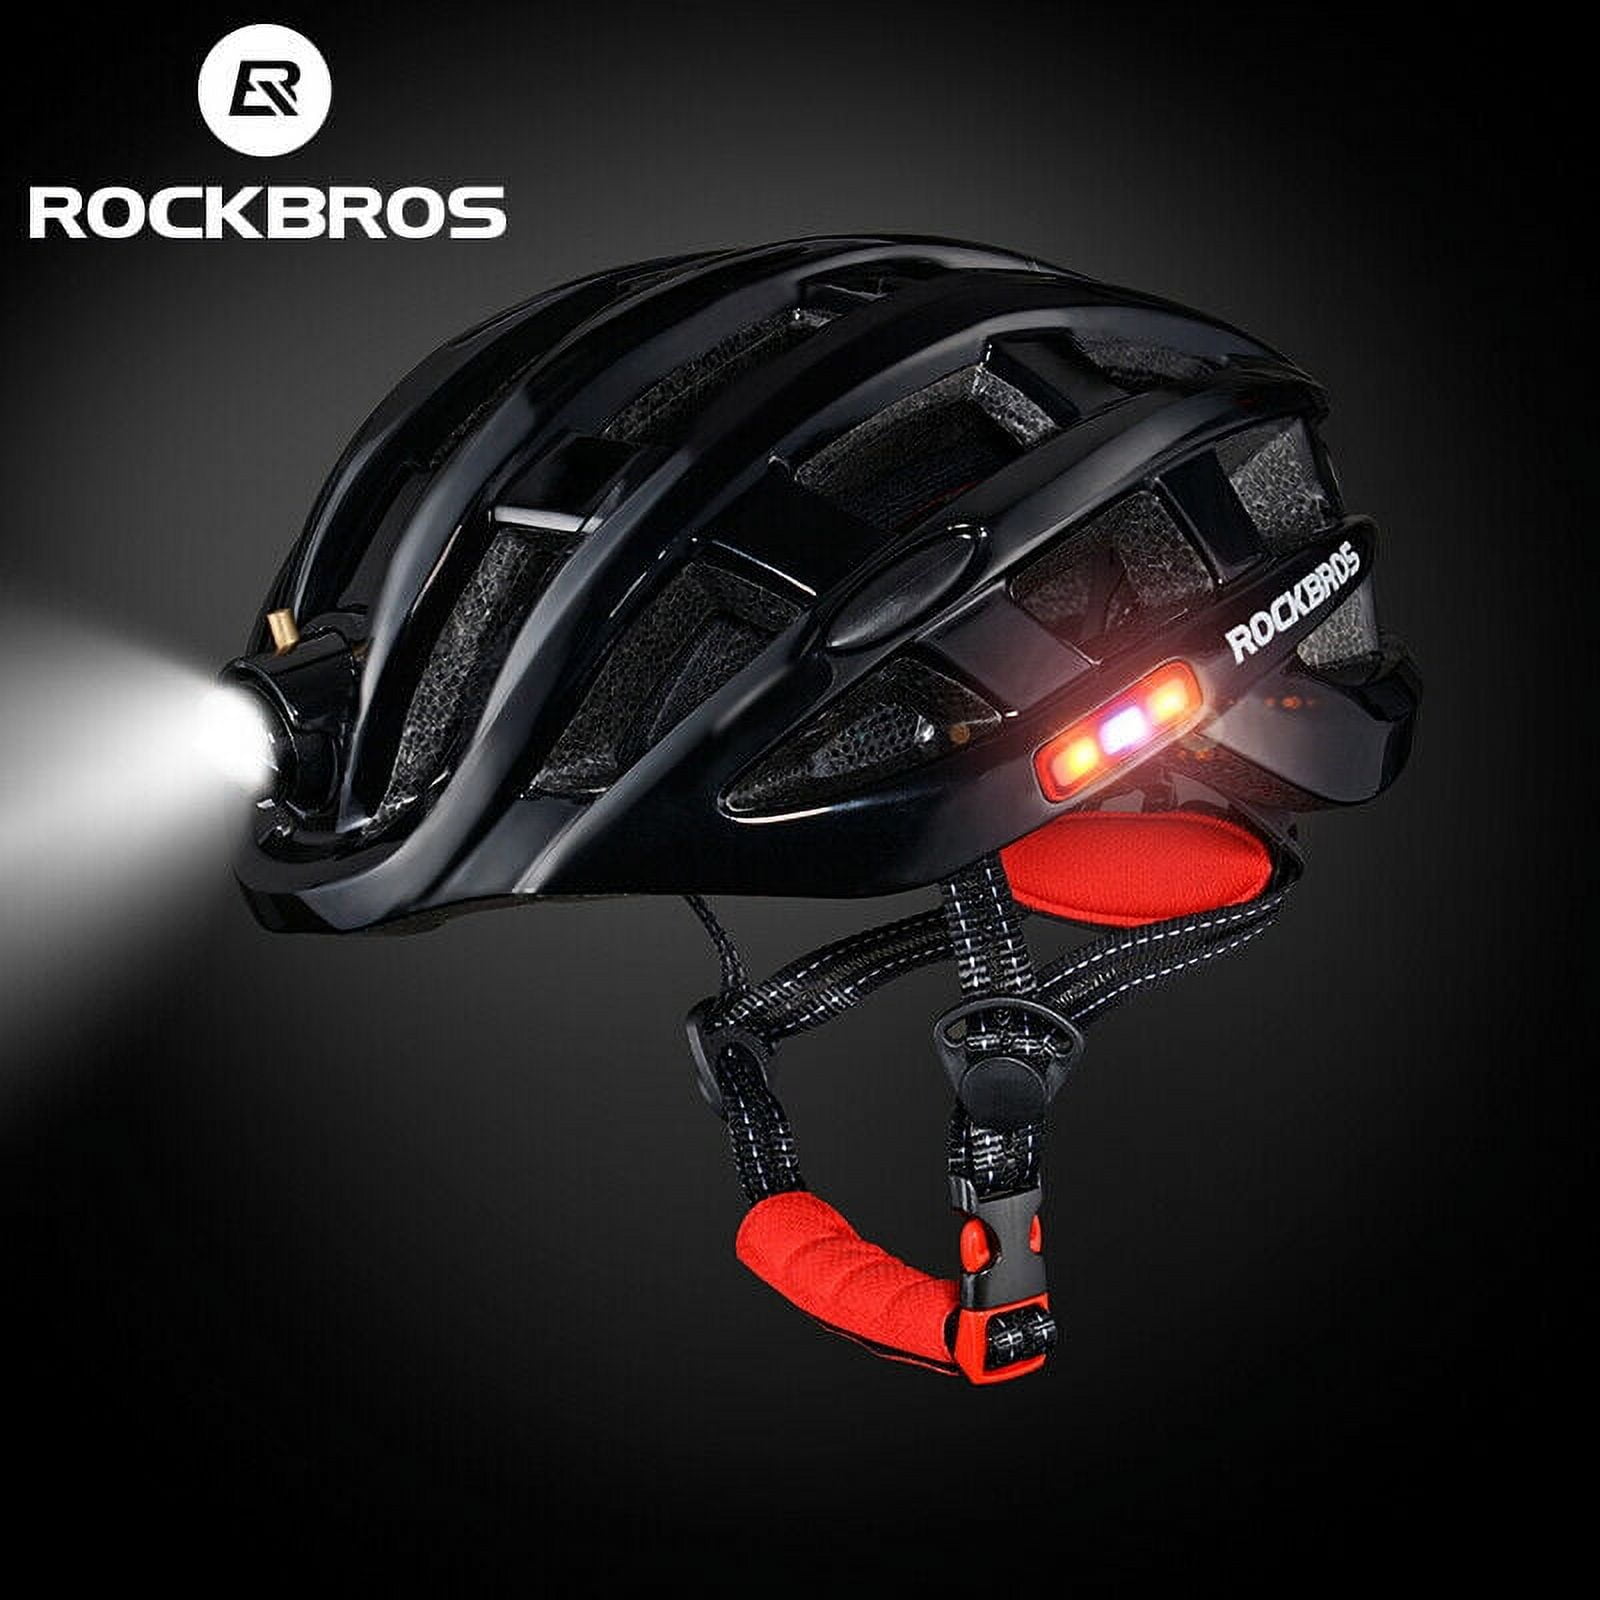 ROCKBROS Cycling Helmet Bike Helmet With Front Light Taillight and Side  lights( 57-62cm Universial adjustment, 24 Vents, USB, Waterproof)